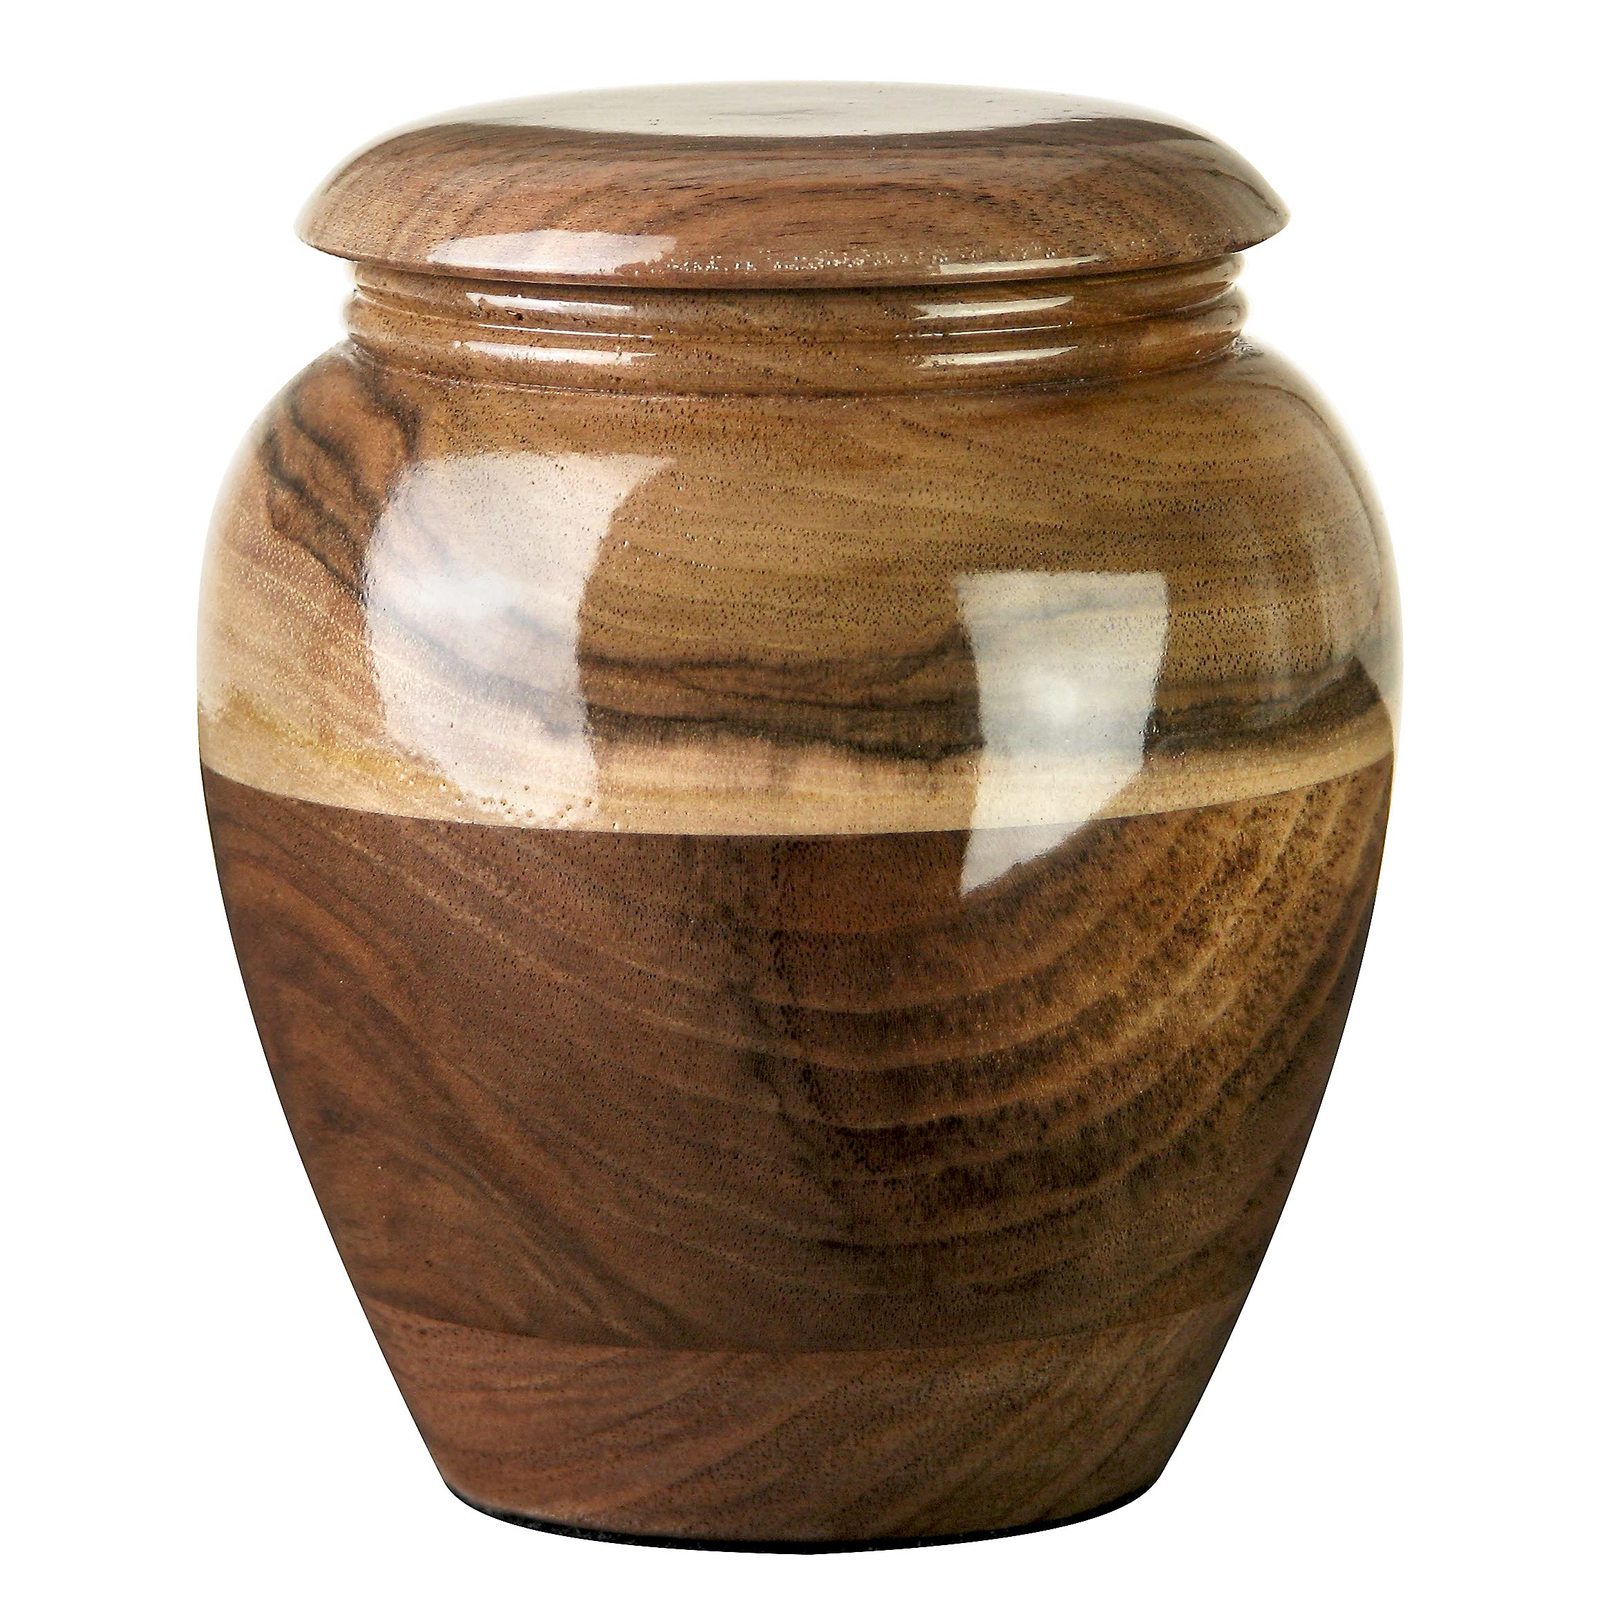 Primary image for Stunning and Very Special Italian Walnut Cremation Funeral urn for Ashes , Crema